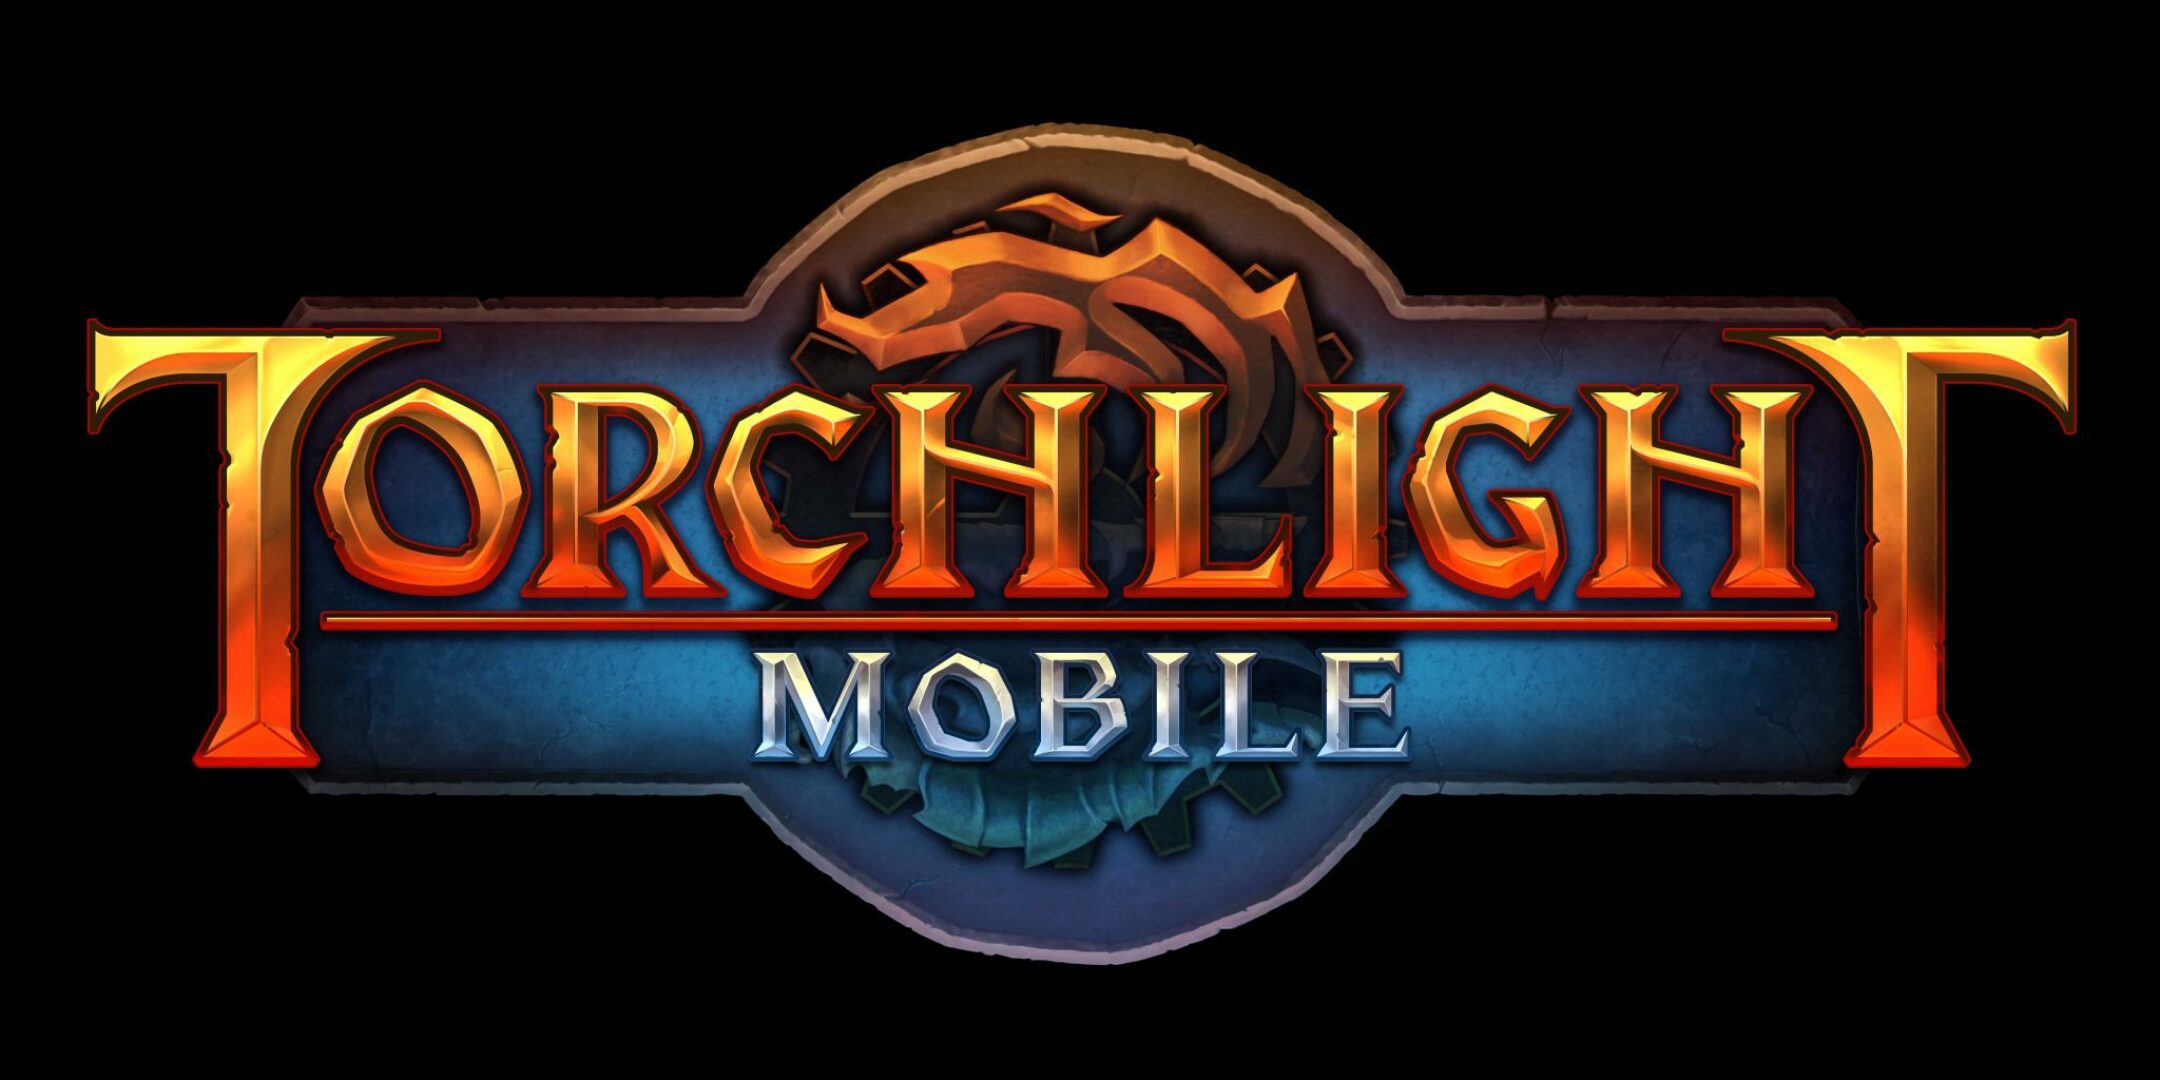 Torchlight Coming to Mobile Devices Later This Year